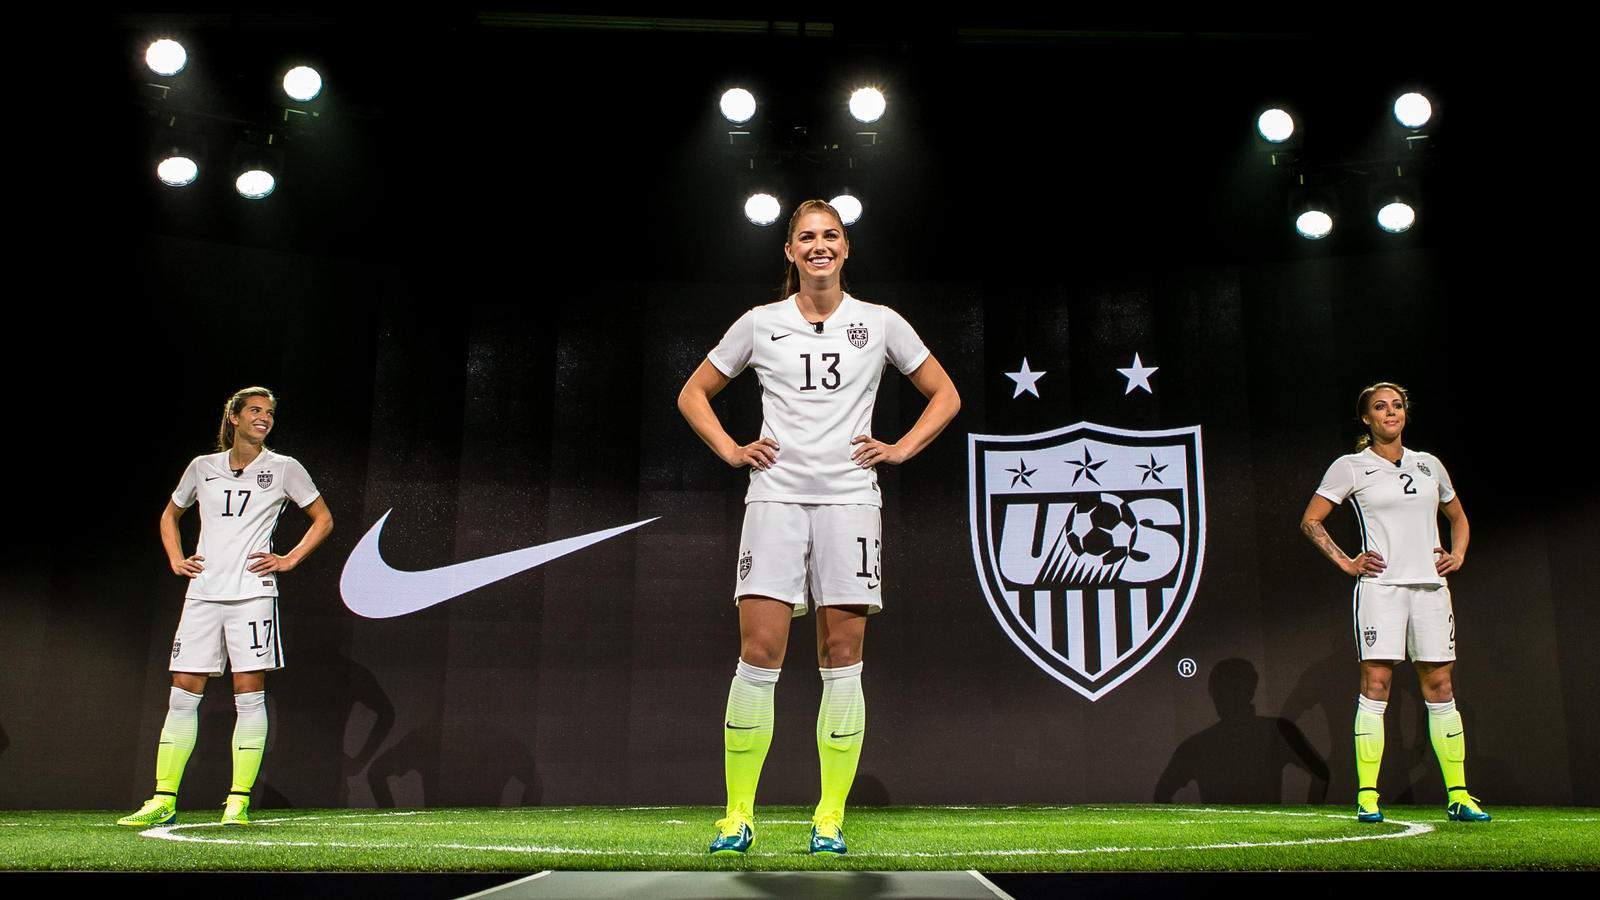 U.S. Women's National Team New Uniforms for the 2015 World Cup